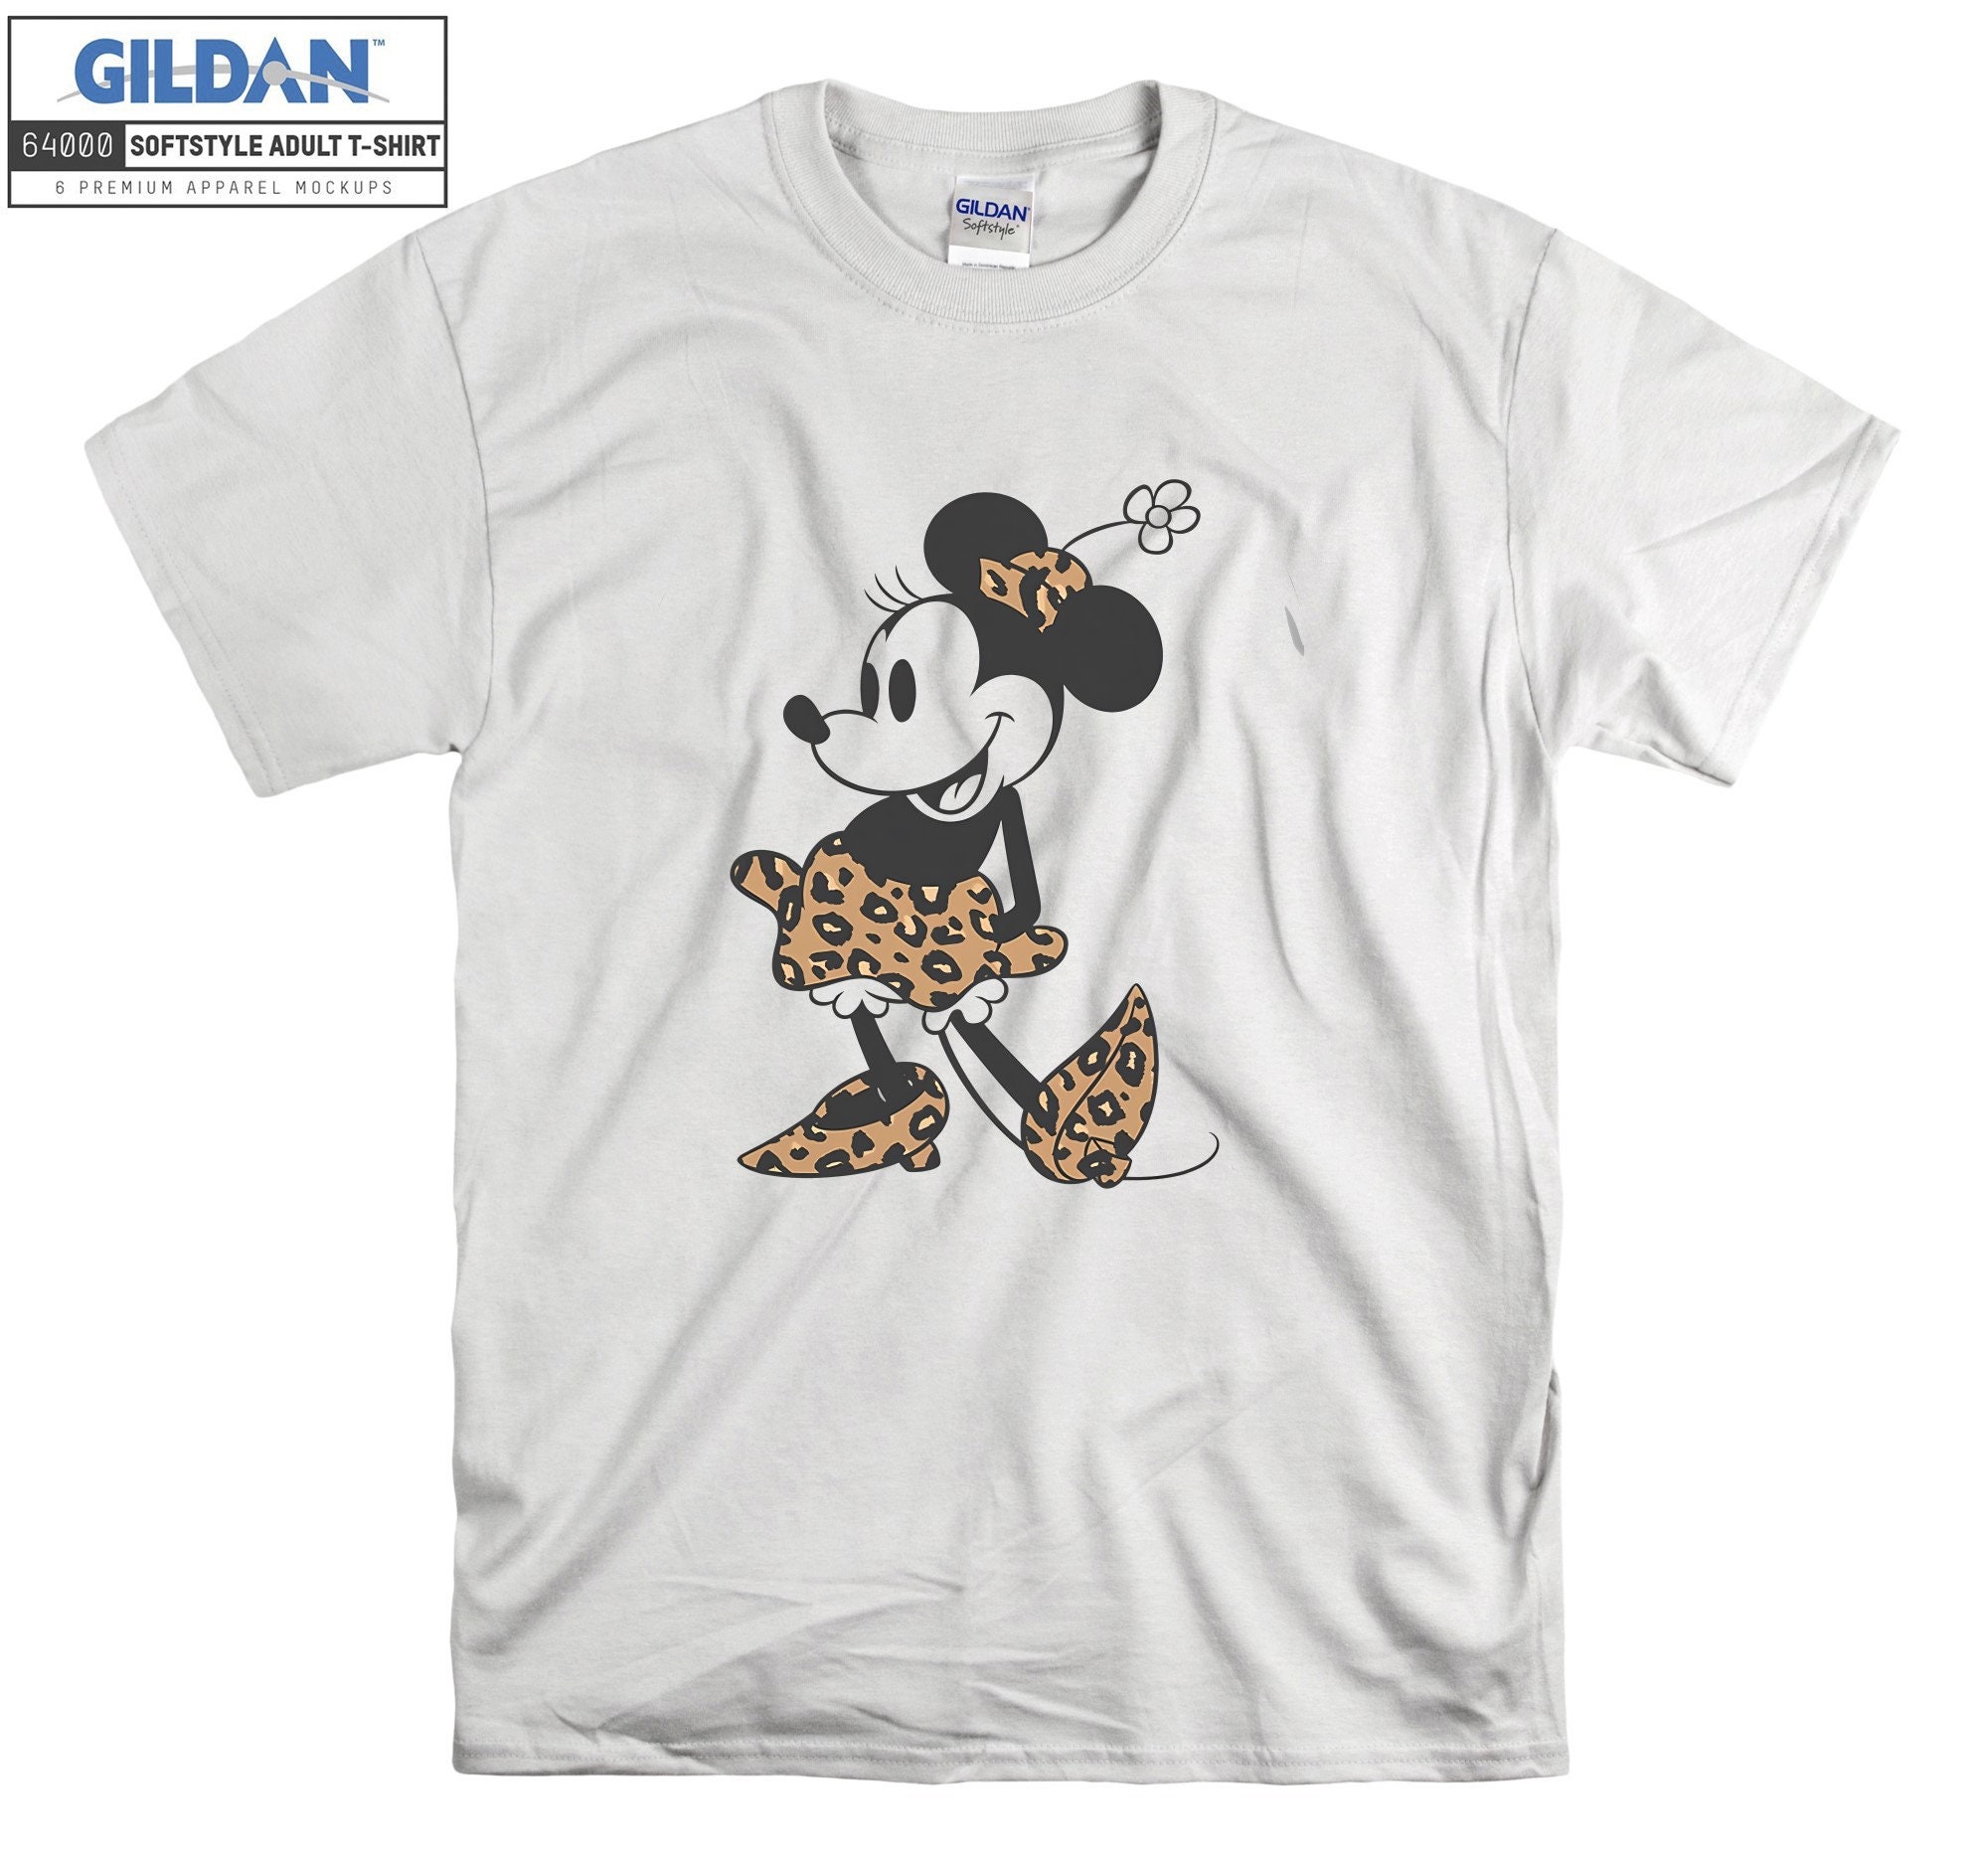 Disney Minnie Mouse & Mickey Mouse Guitar Applique Youth Girls Tee Shirt 